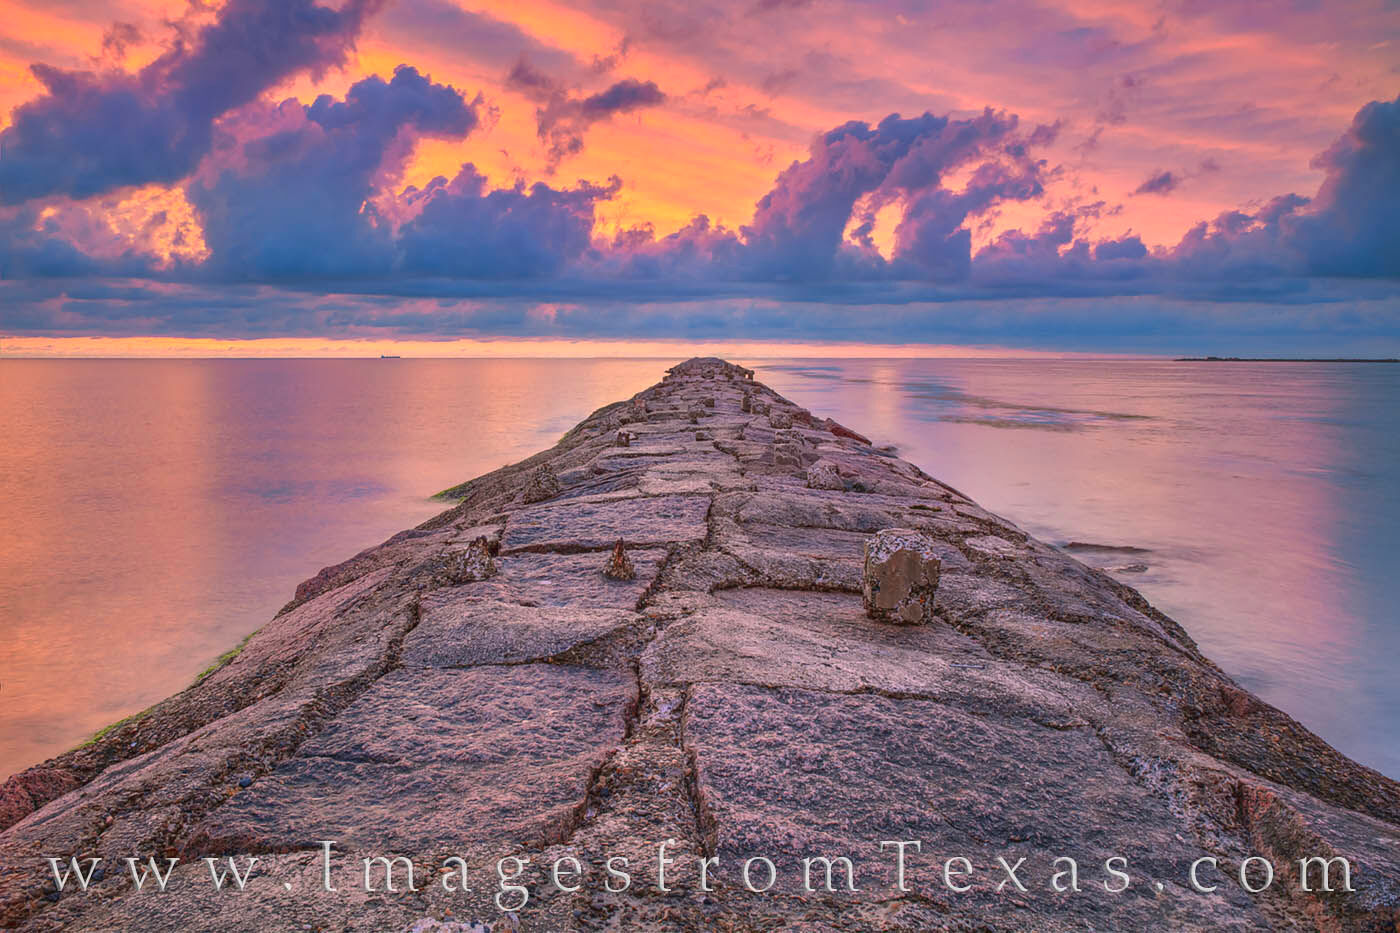 The jetty near Isla Blanca reaches out into the warm gulf waters from South Padre Island. The high clouds let up in pastel pink...